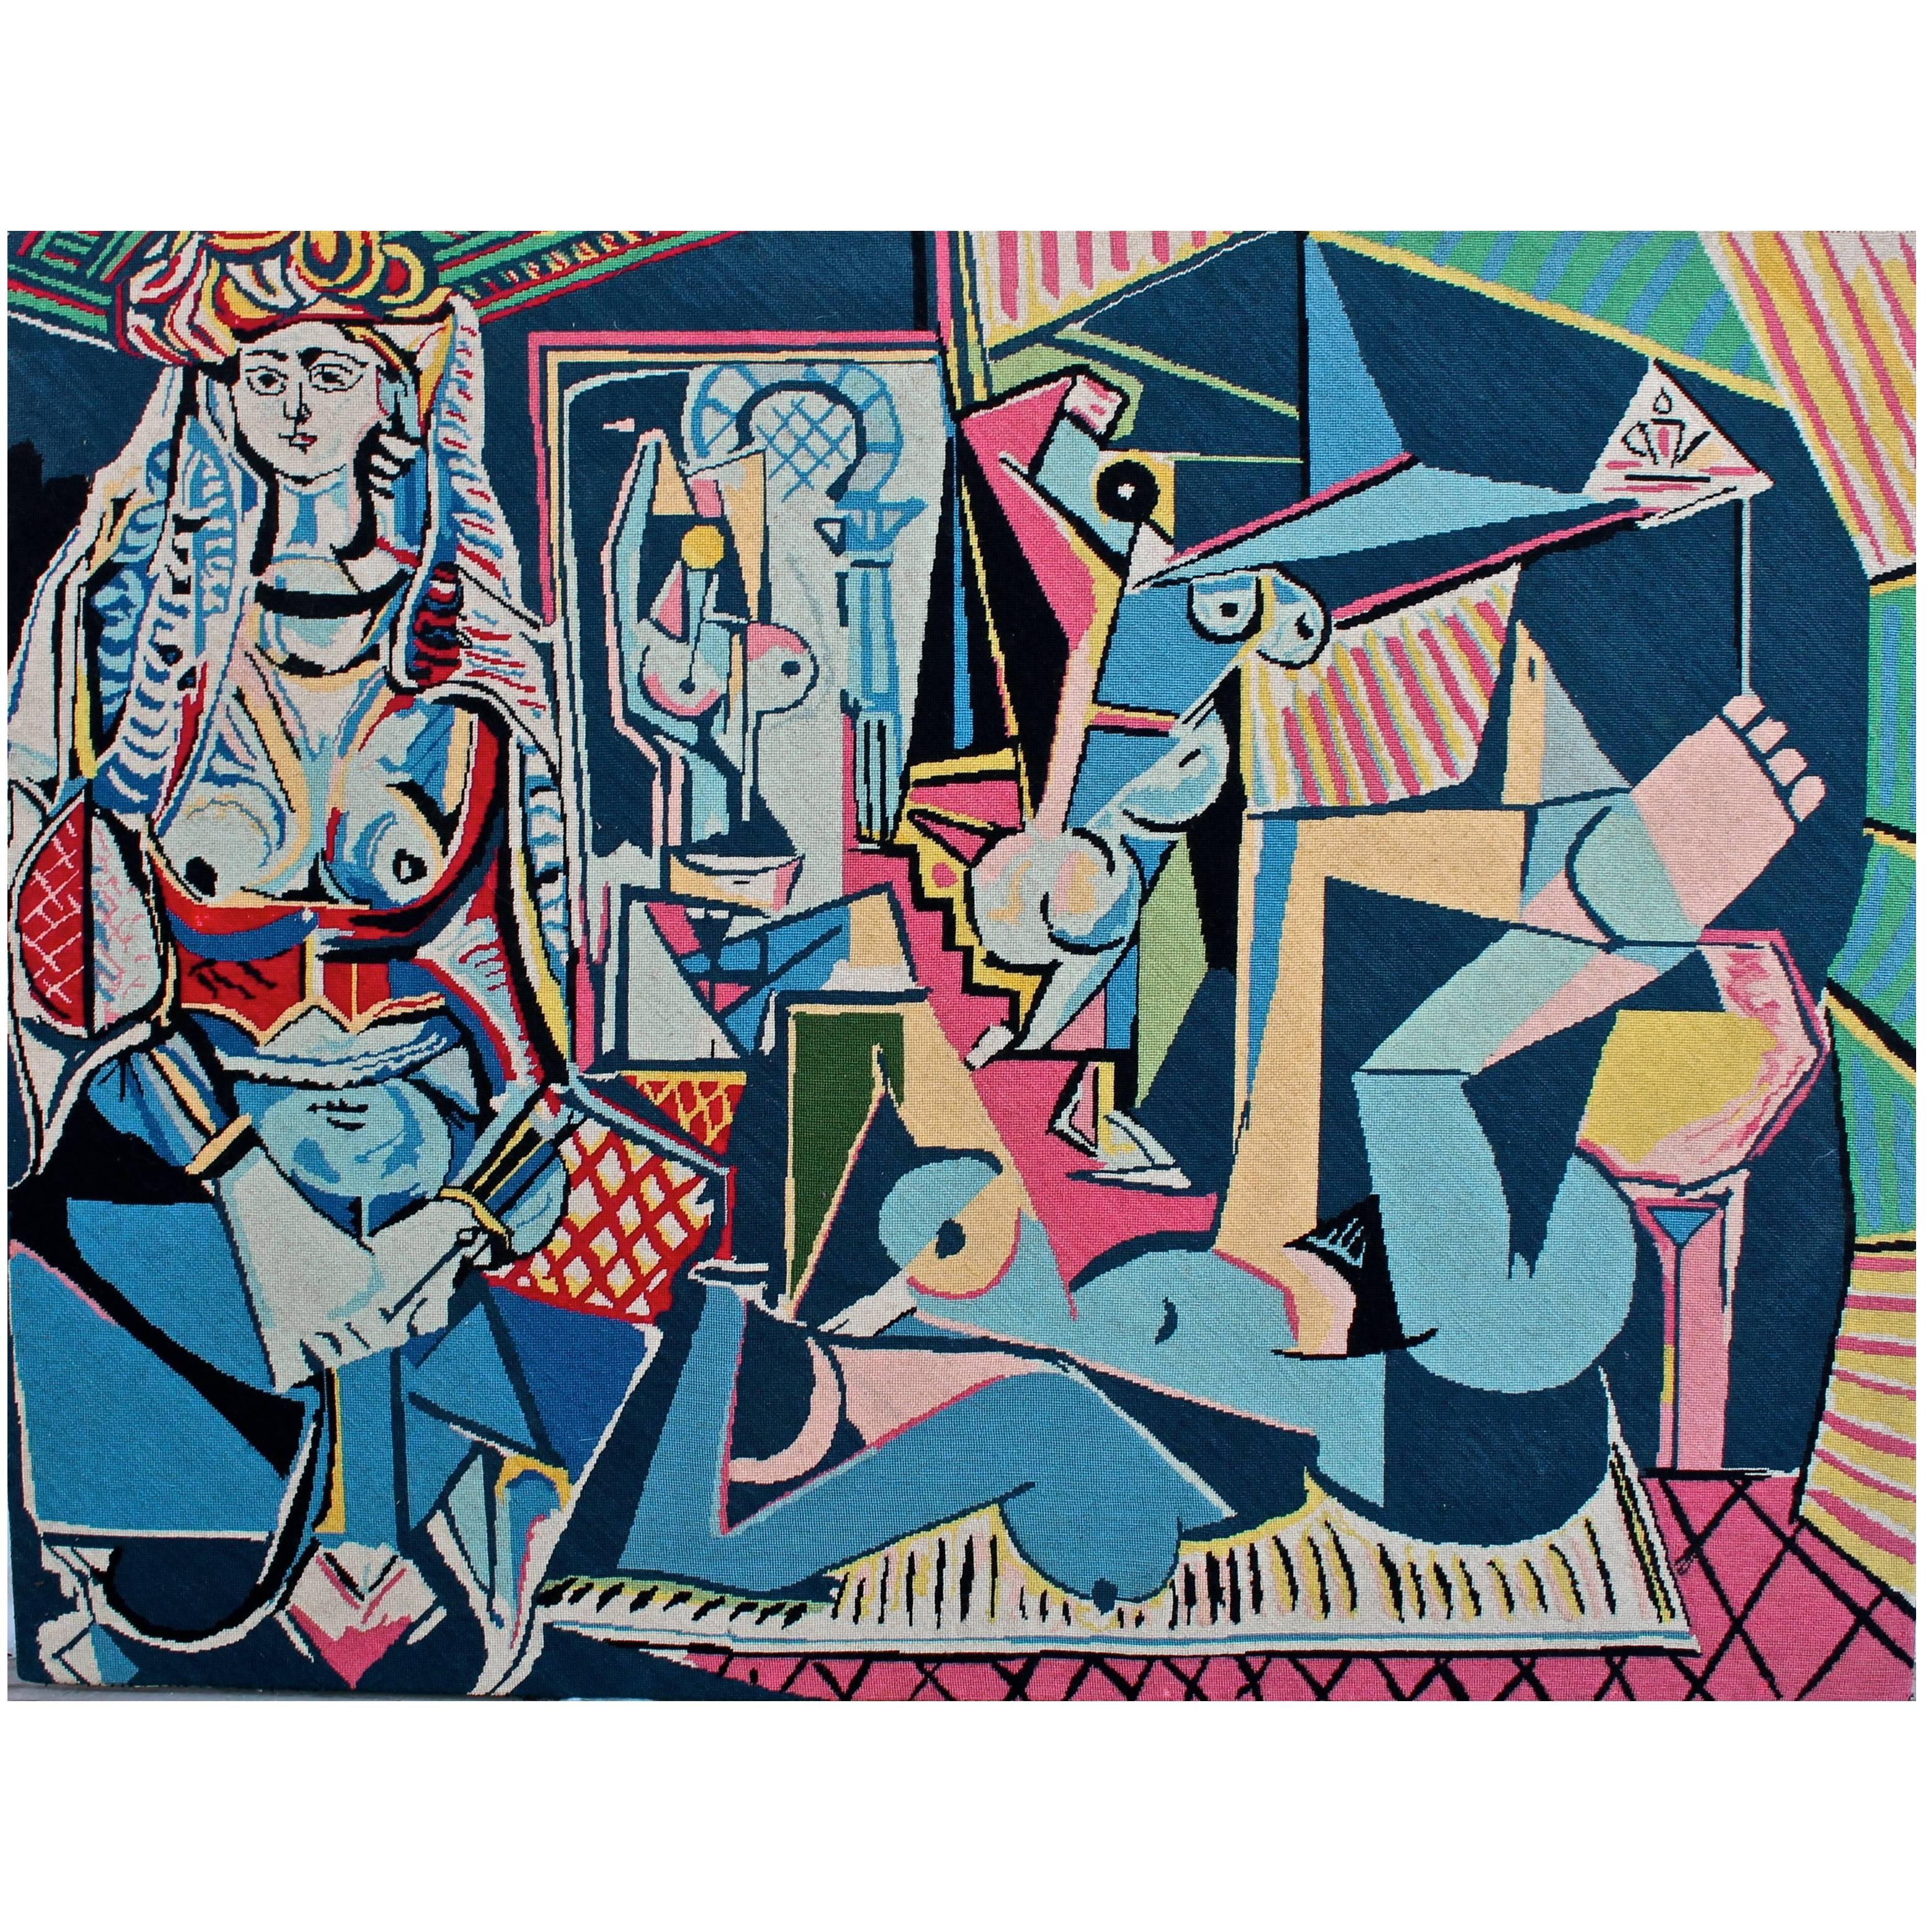 Pablo Picasso 'after' "Les Femmes D'alger, Version "O" Needle Point Tapestry